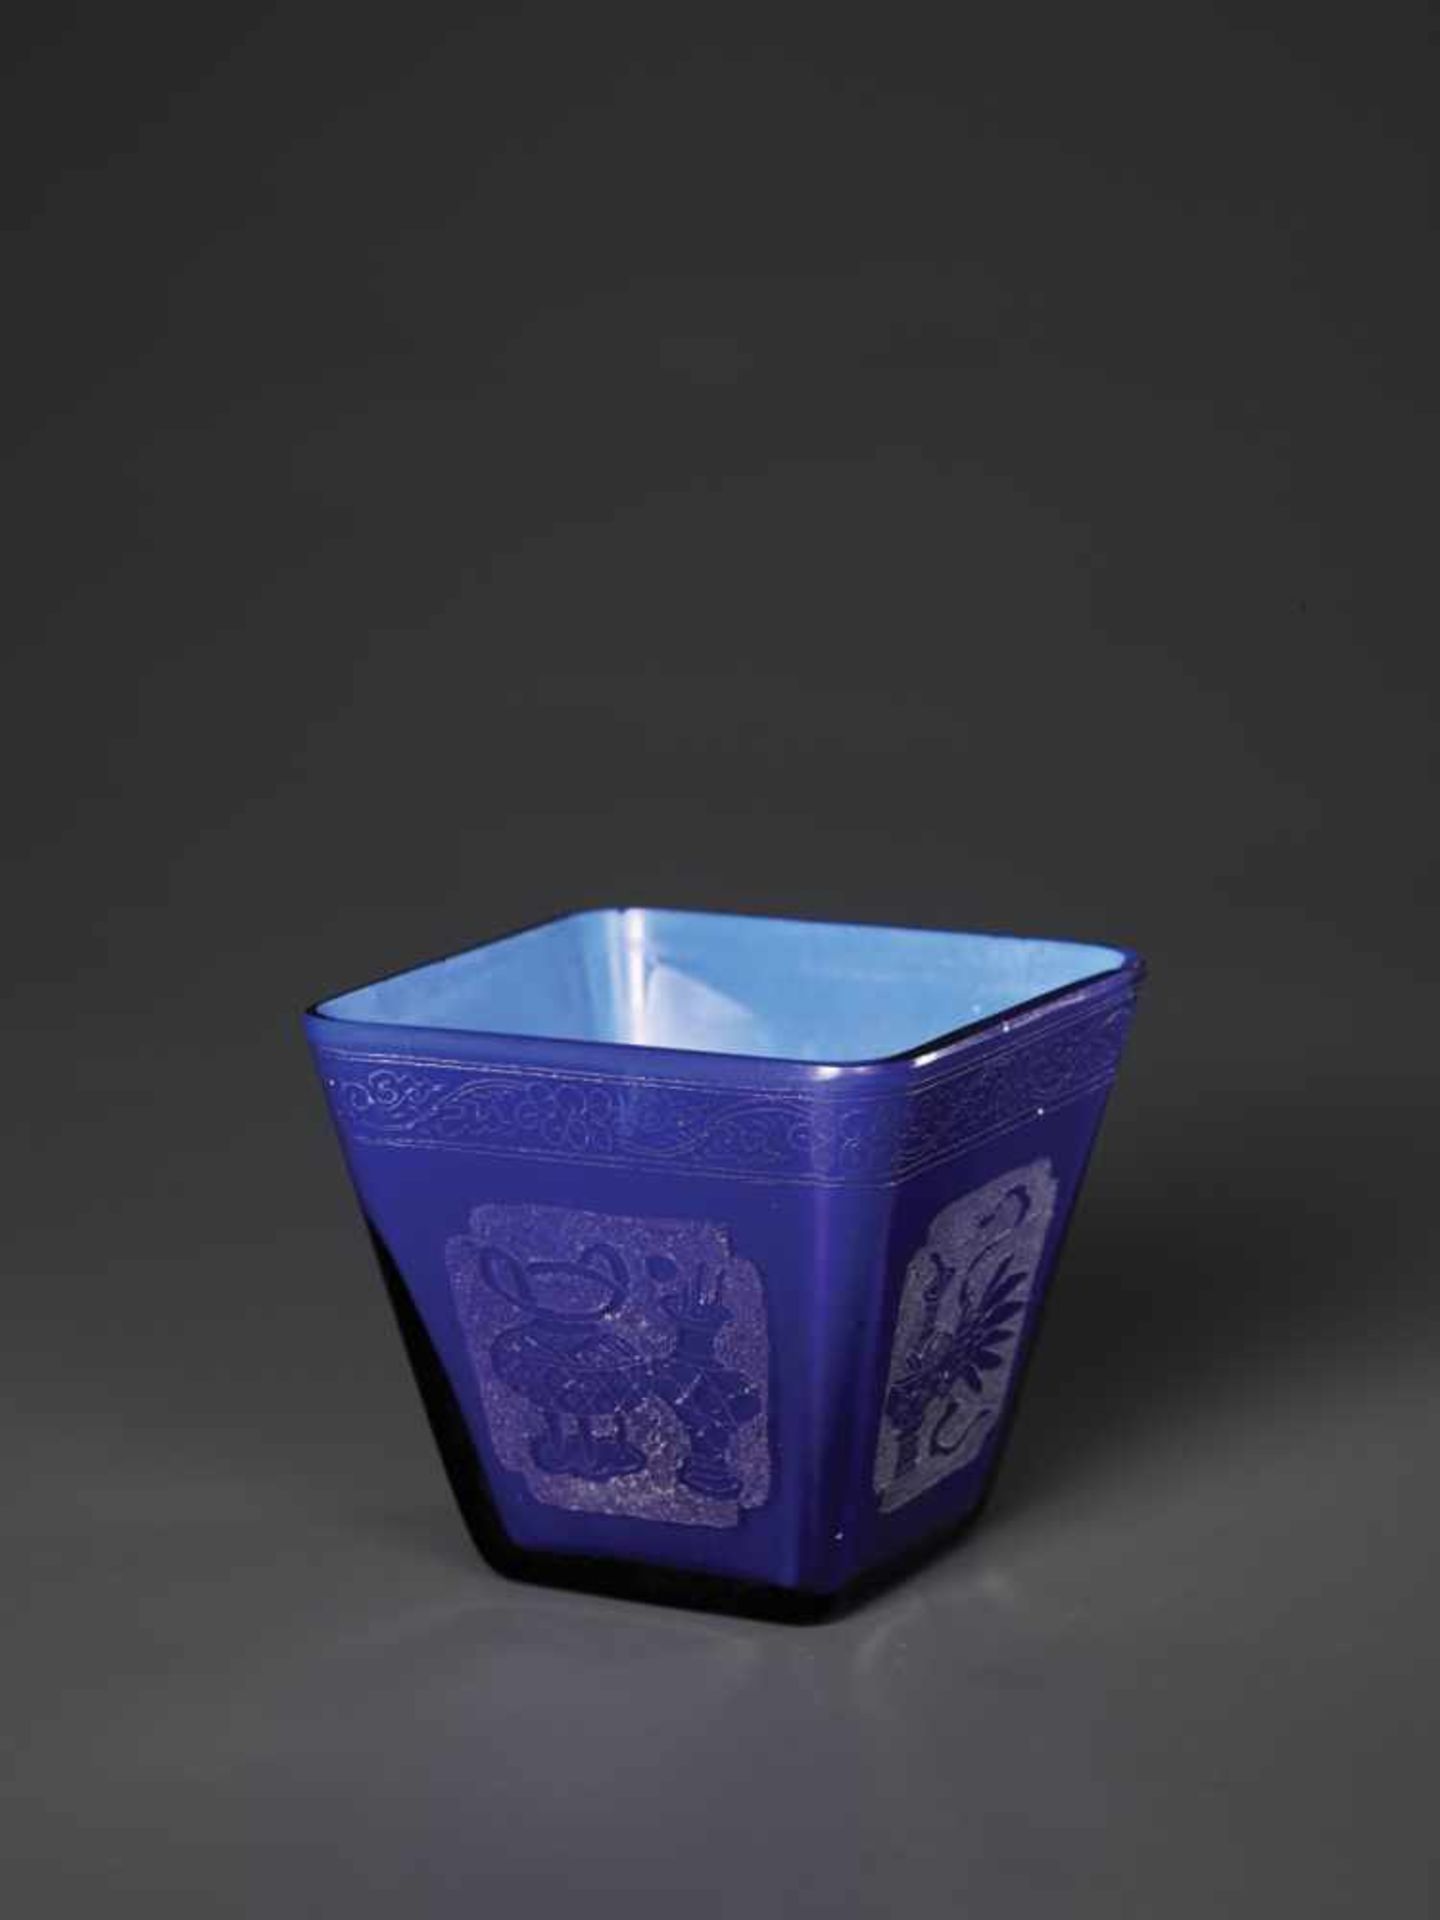 AN ETCHED AND DIAMOND-ENGRAVED SAPPHIRE-BLUE OVERLAY GLASS CUP, KANGXI, 1696-1715 The square-